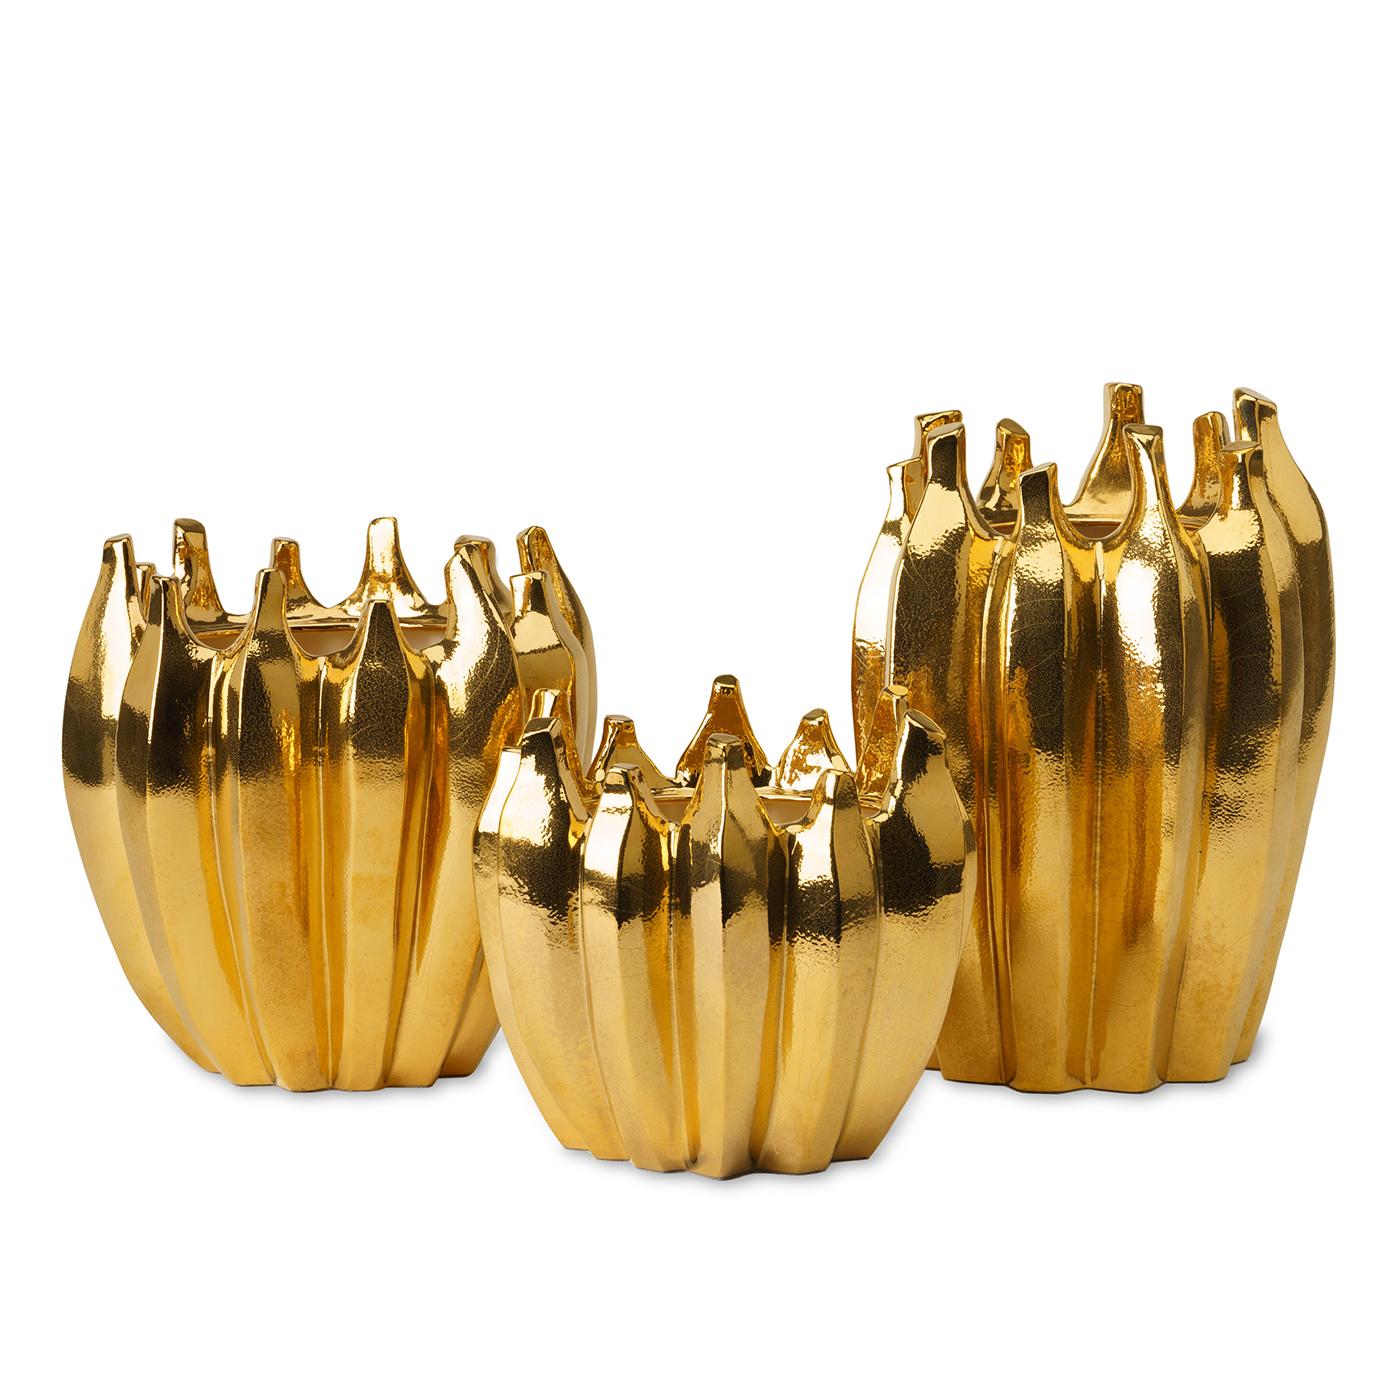 Brimming with opulent character, this luminous vase is distinguished by an extraordinary polished gold finish that enhances its grooved, rounded silhouette with spiked rims. A superb accent piece for an elegant entryway or living room decor, this